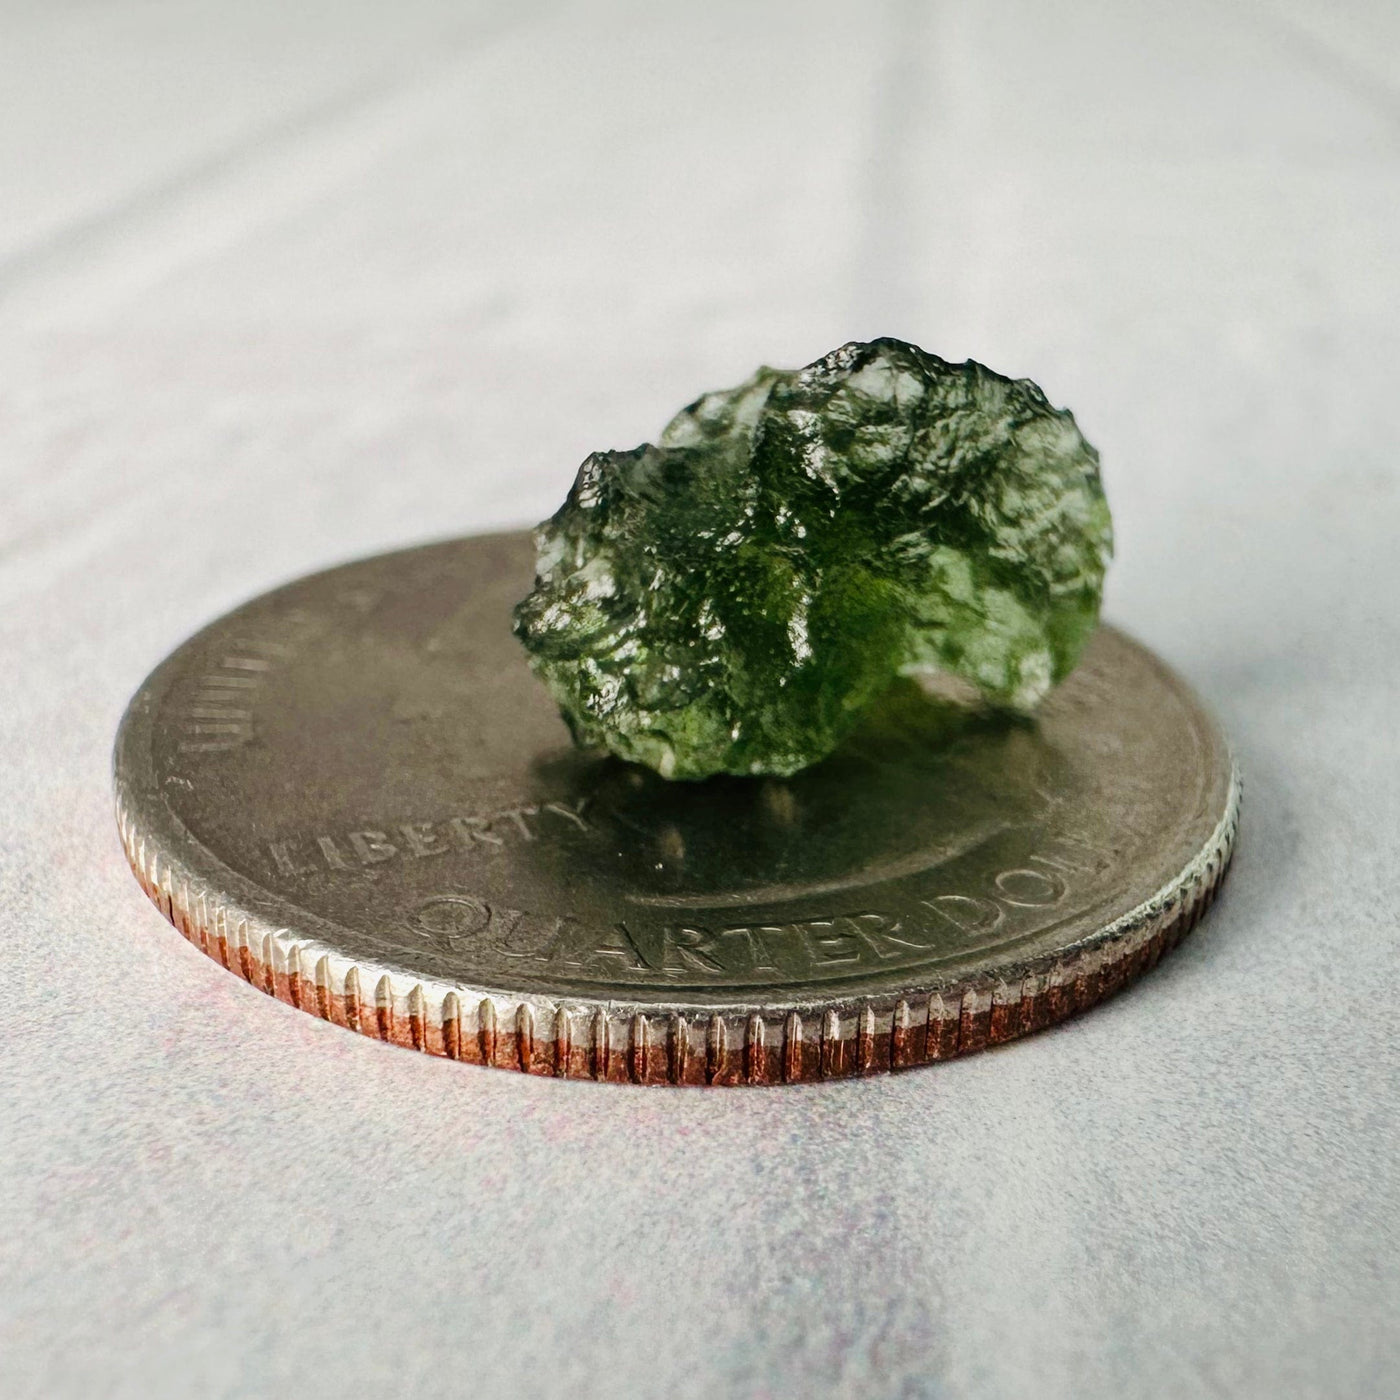 0.6 gram (option A) Moldavite piece on top of a quarter for size reference.